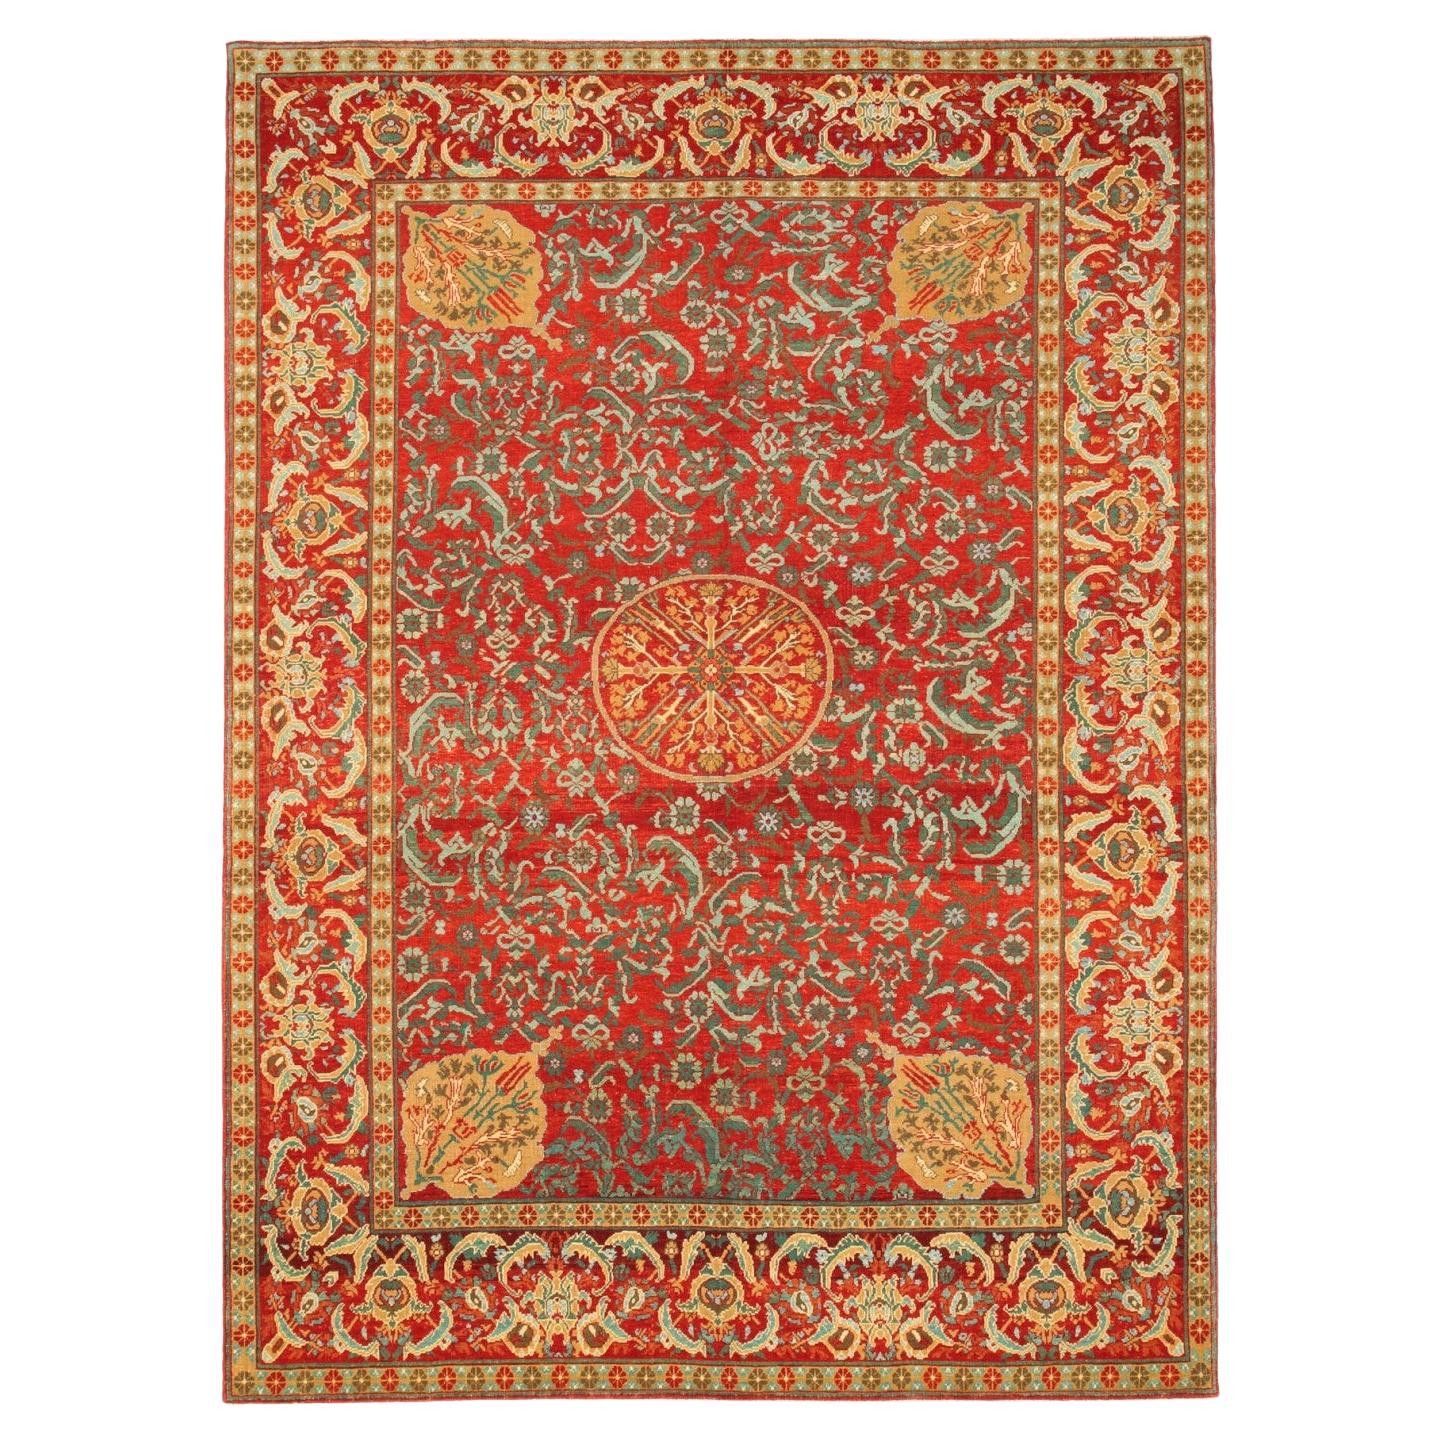 Ararat Rugs Turkish Court Manufactury Rug Ottoman Revival Rug Natural Dyed For Sale